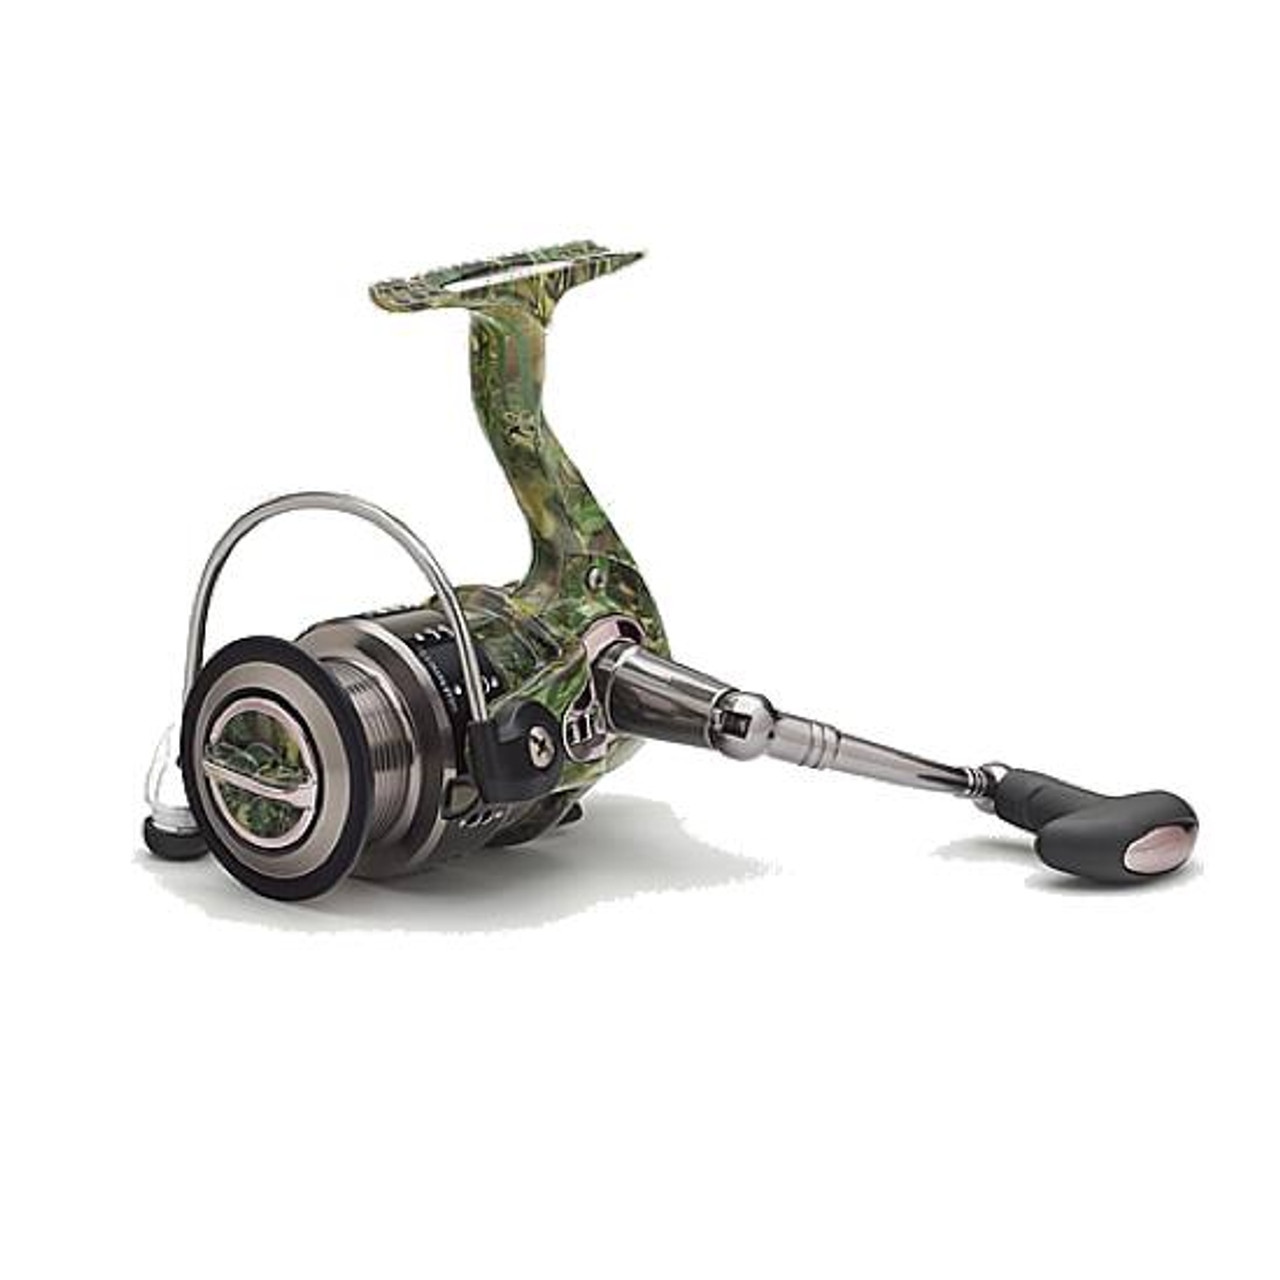 Ardent Edgewater Fishouflage Spinning Reel - Size 1000 [FC